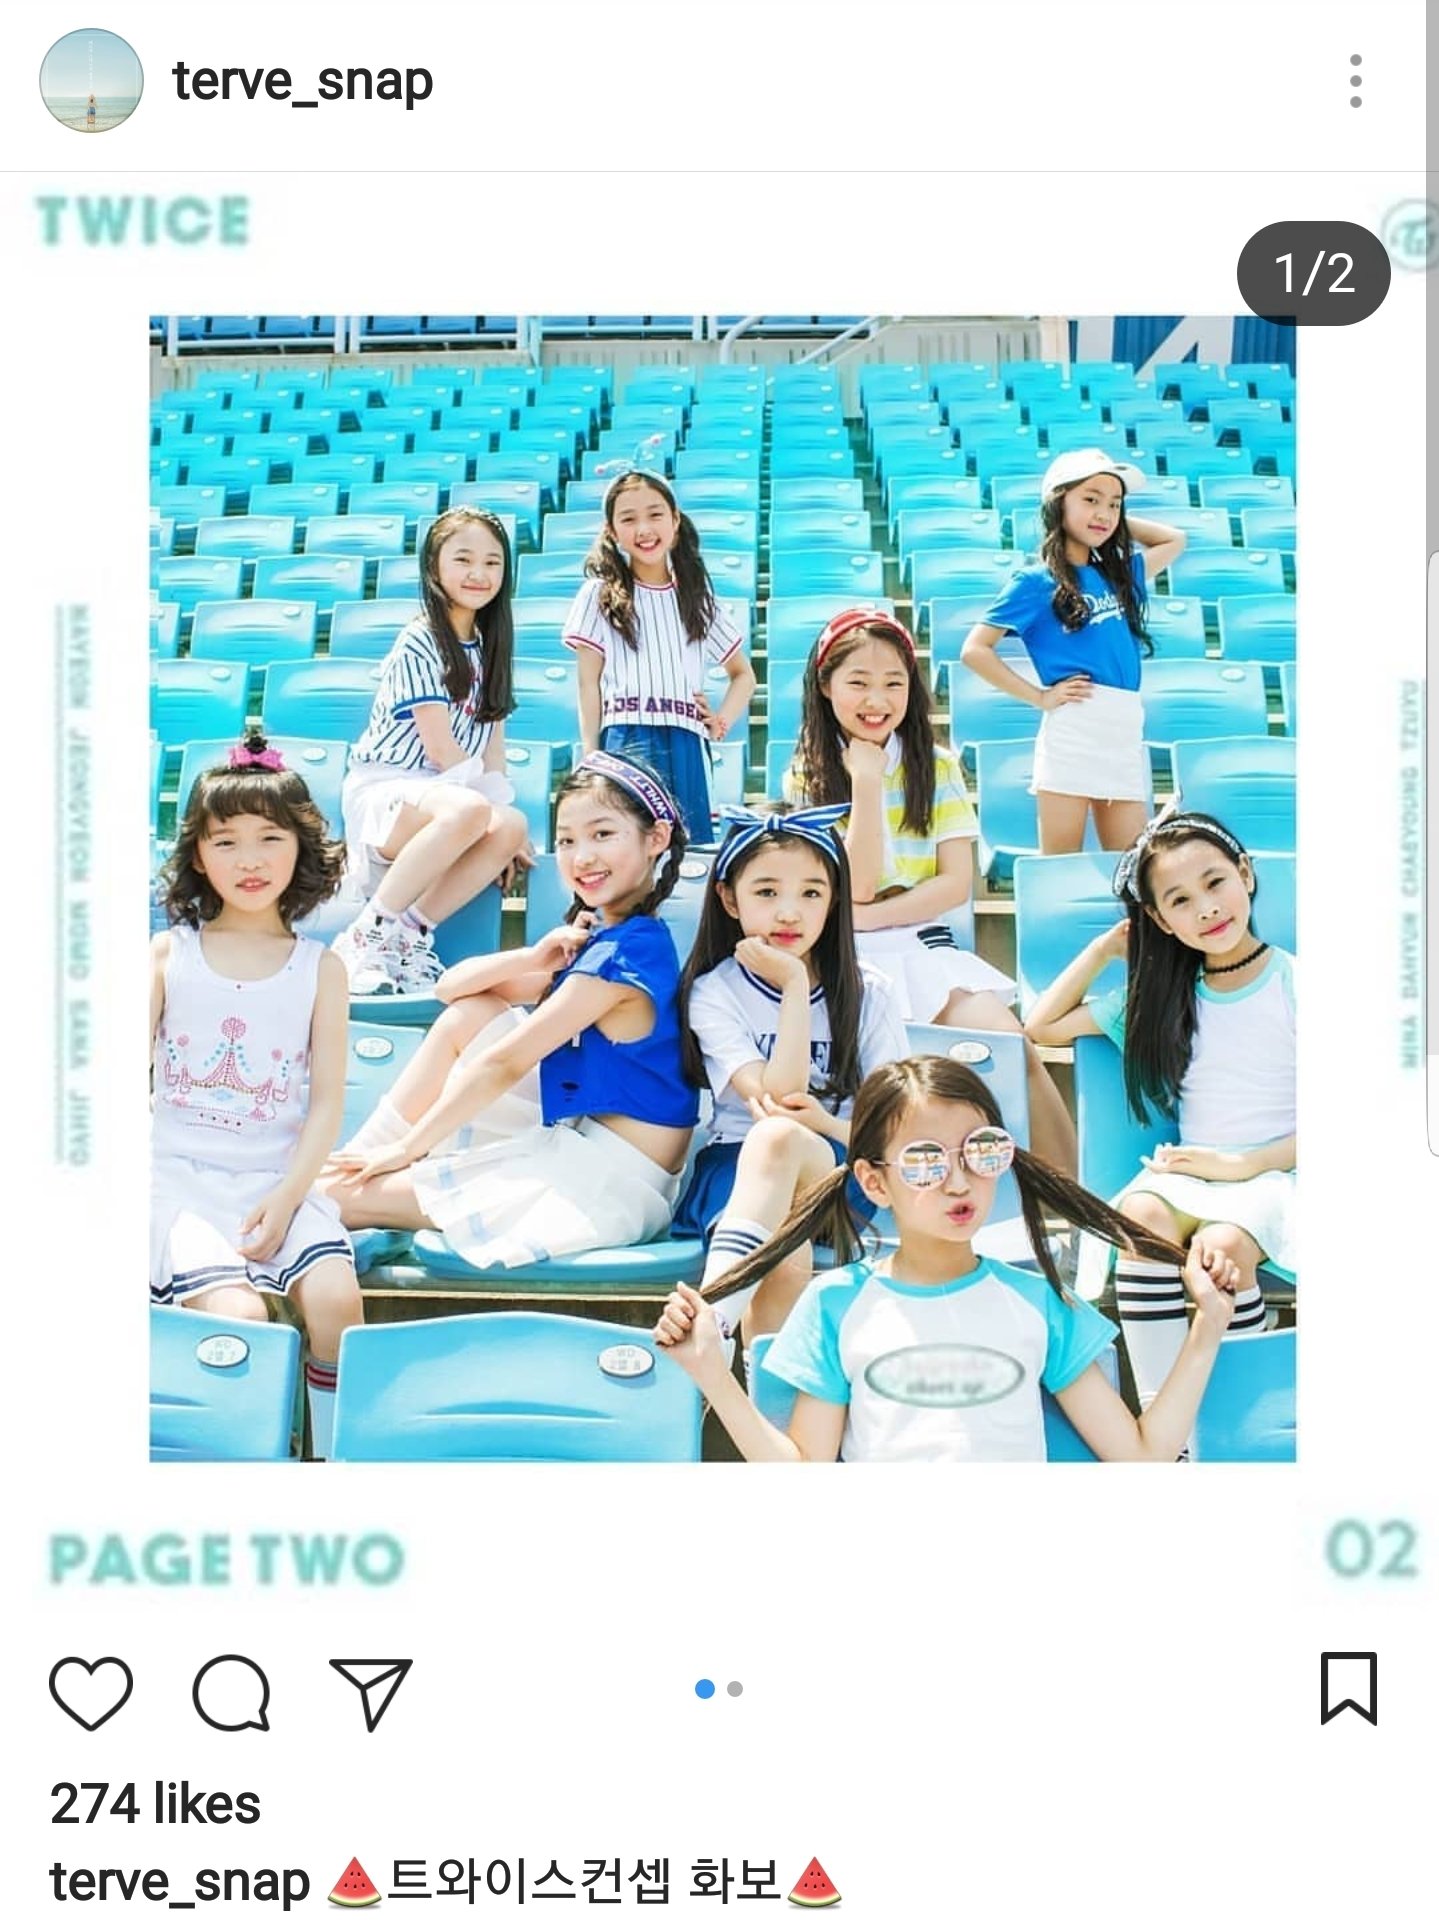 Sk I Found This Really Cute This Photographer Does Kids Photoshoot And They Have The Twice Cheer Up Concept They Replicated The Album Cover And Teaser Twice 트와이스